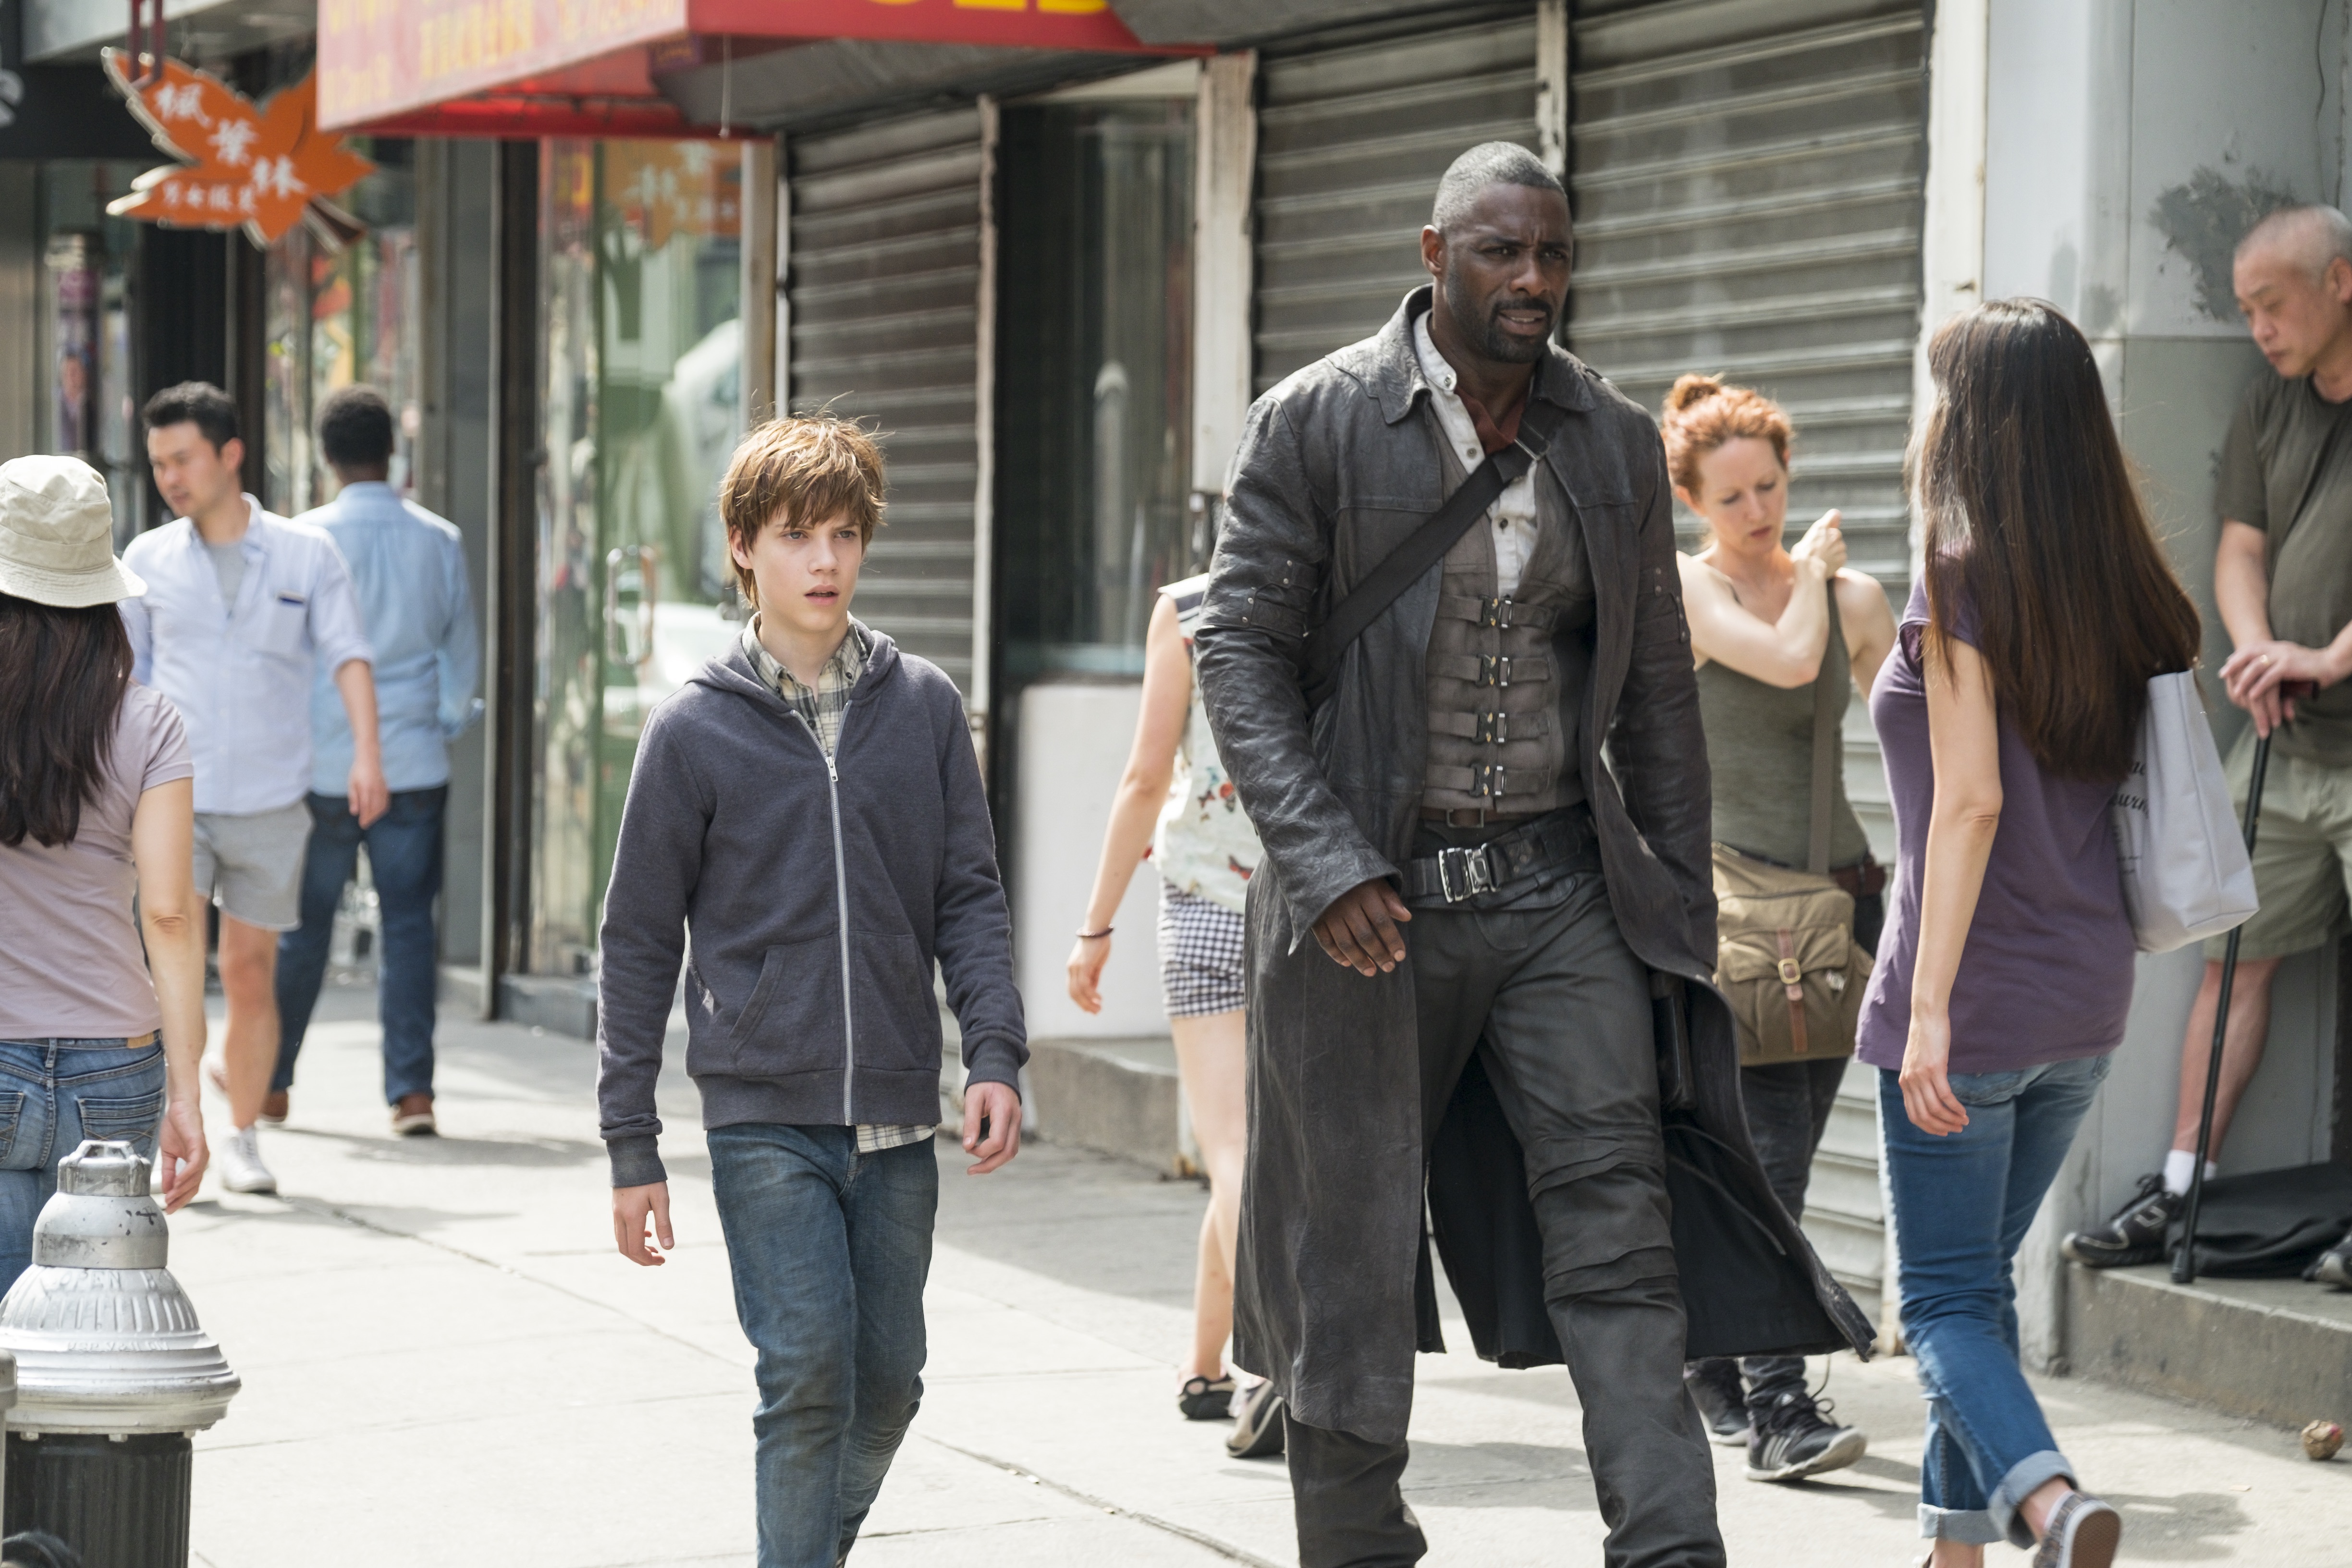 Jake Chambers (Tom Taylor) and Roland (Idris Elba) in Columbia Pictures' THE DARK TOWER.